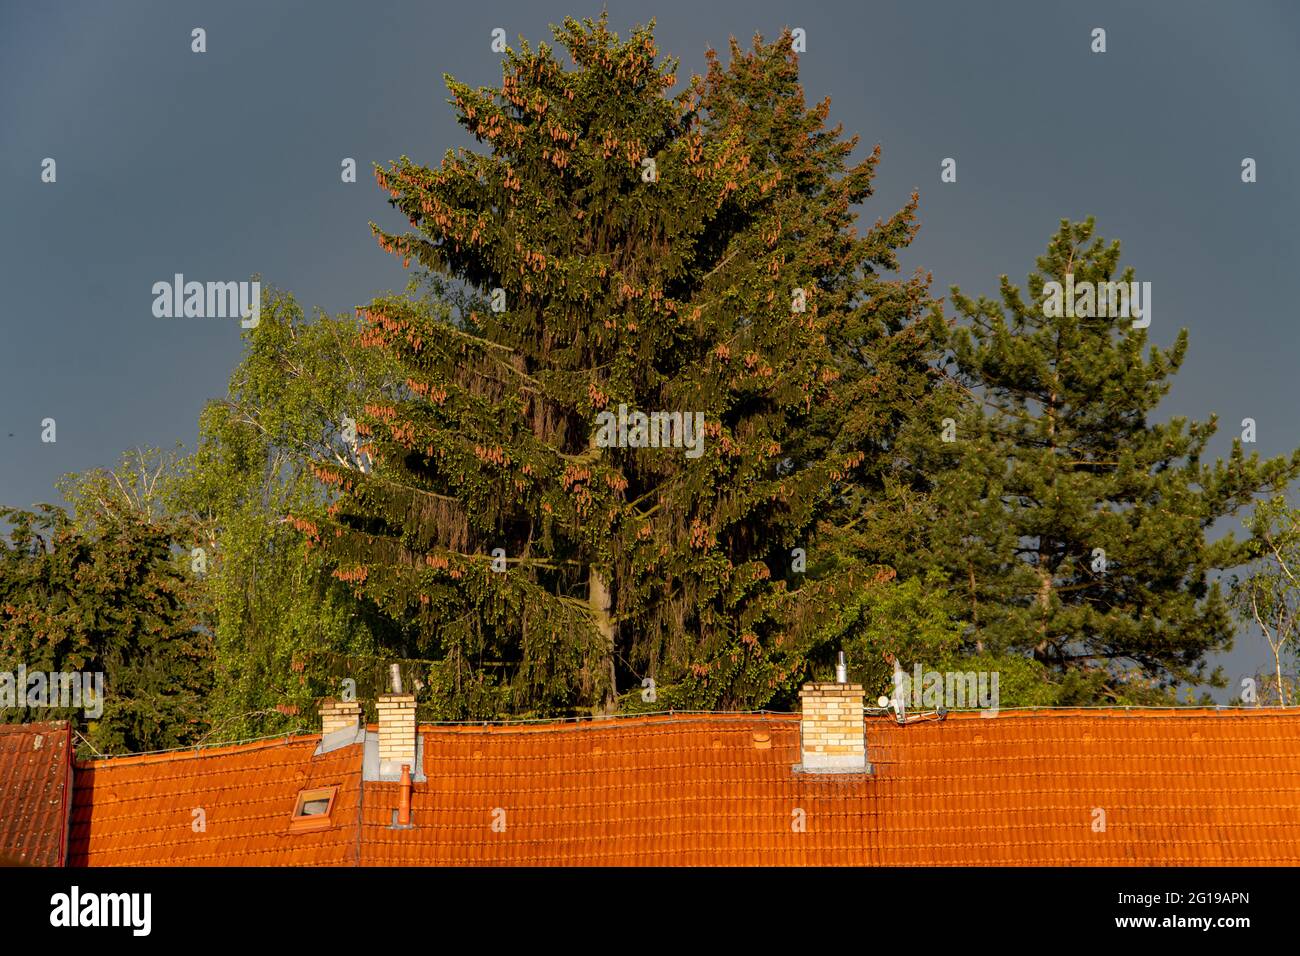 Dark sky with rain clouds over the roofs and conifers with cones Stock Photo